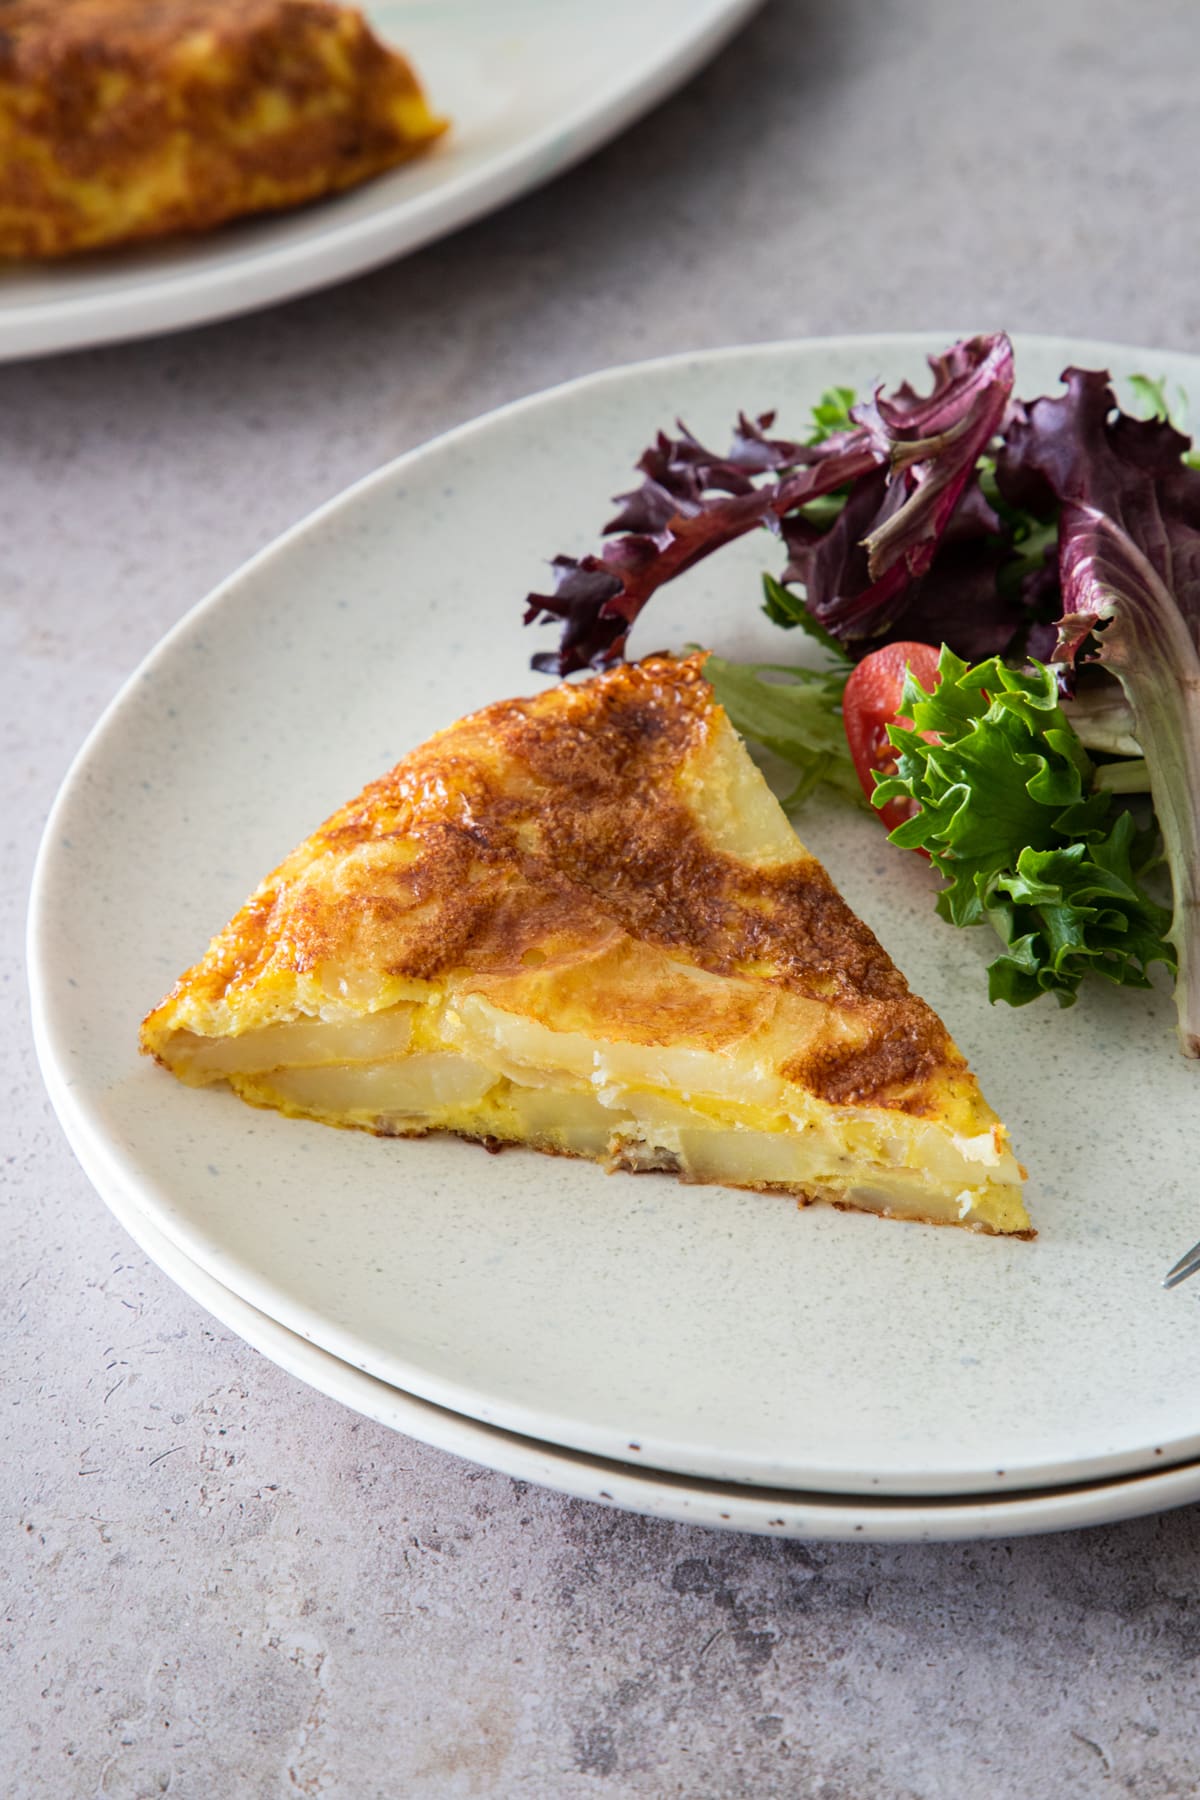 How To Cook A Spanish Omelette: The Perfect Tortilla De Patatas